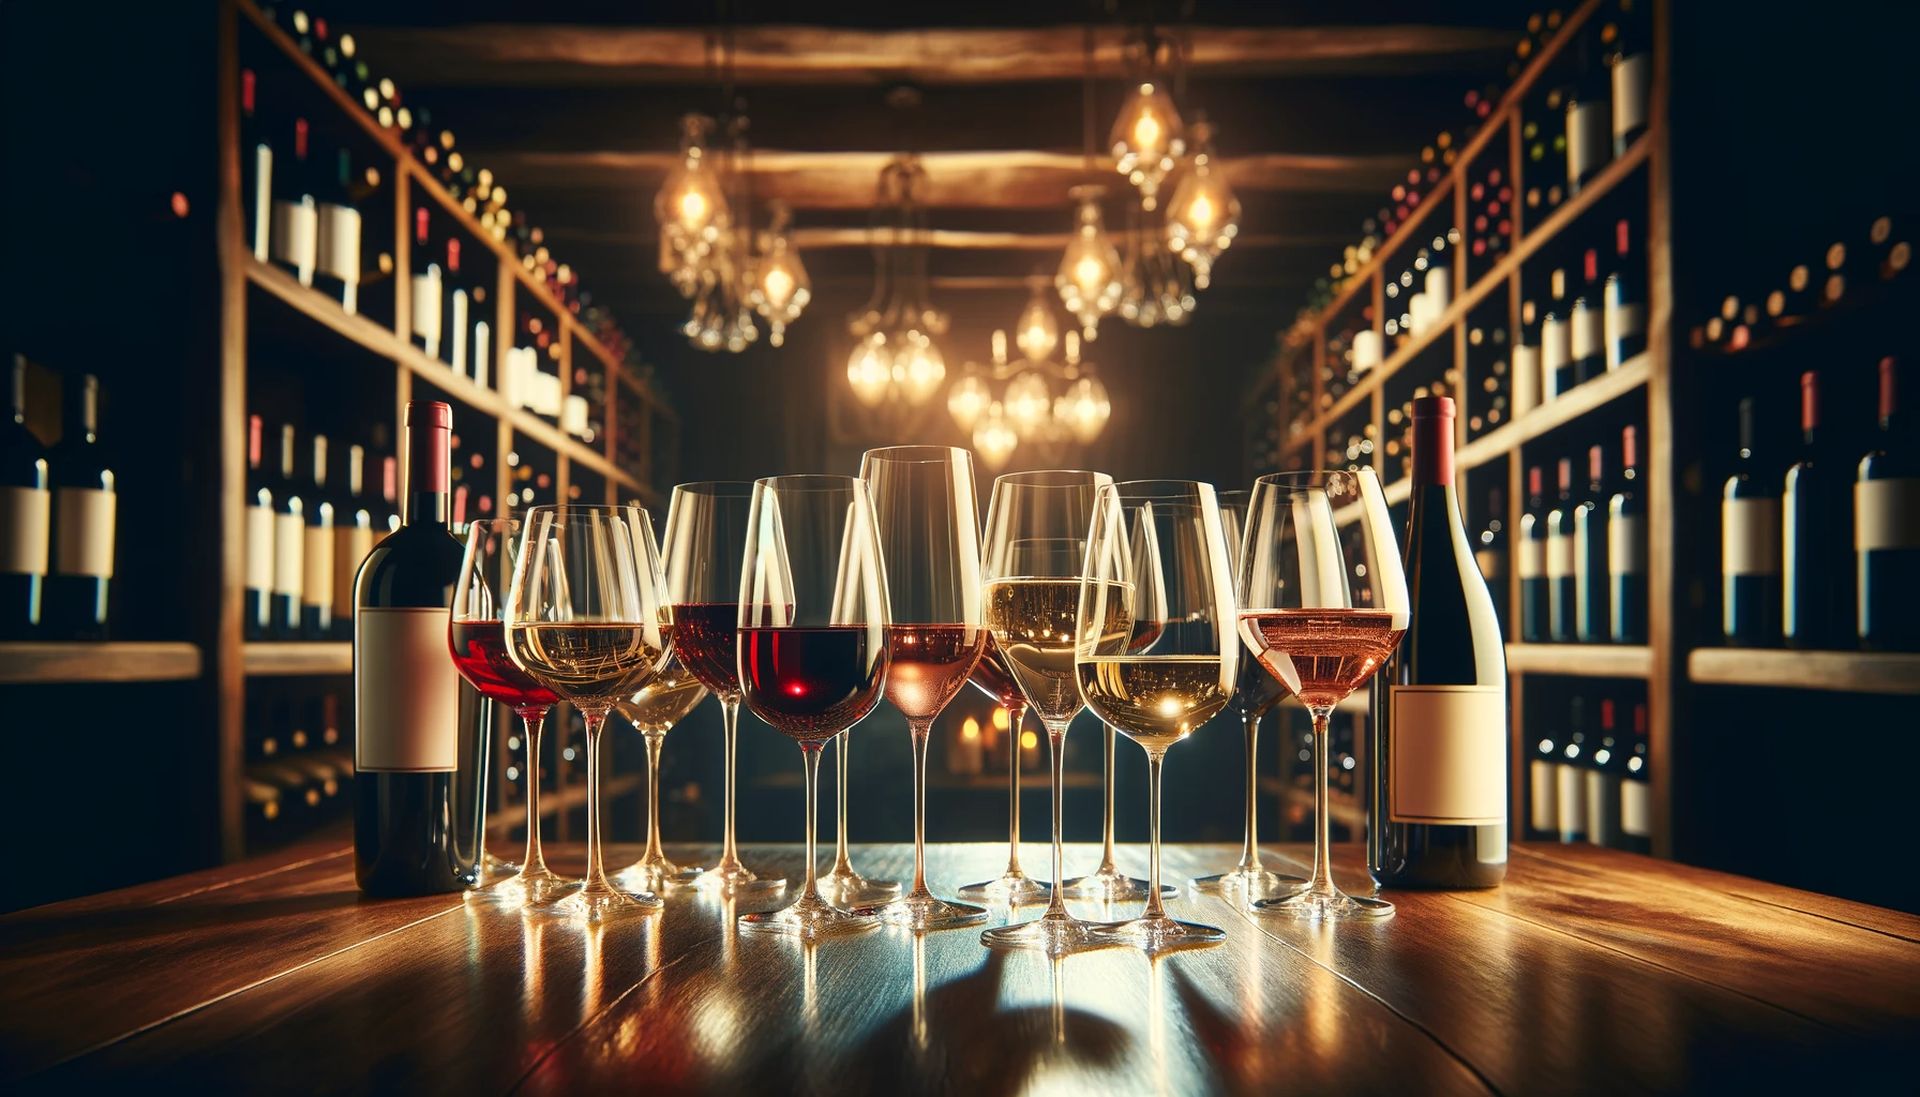 An elegant wine tasting setup with a variety of wine glasses filled with different types of wine, arranged on a polished wooden table. The background